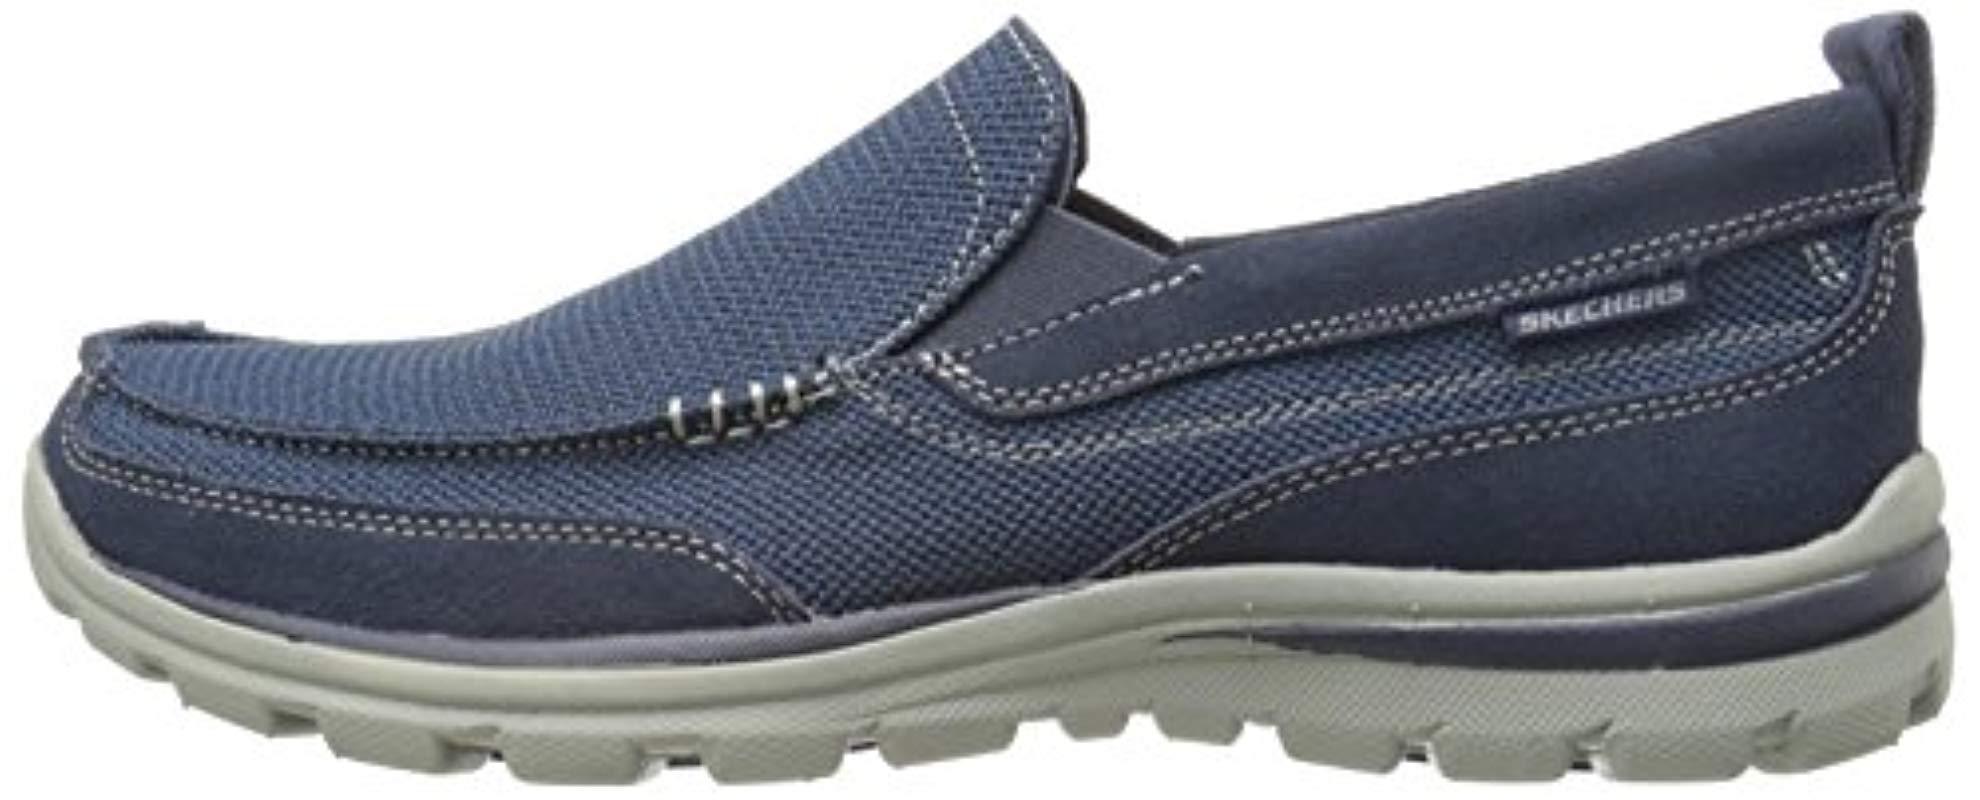 Skechers Leather Superior Milford Loafers in Blue for Men - Lyst